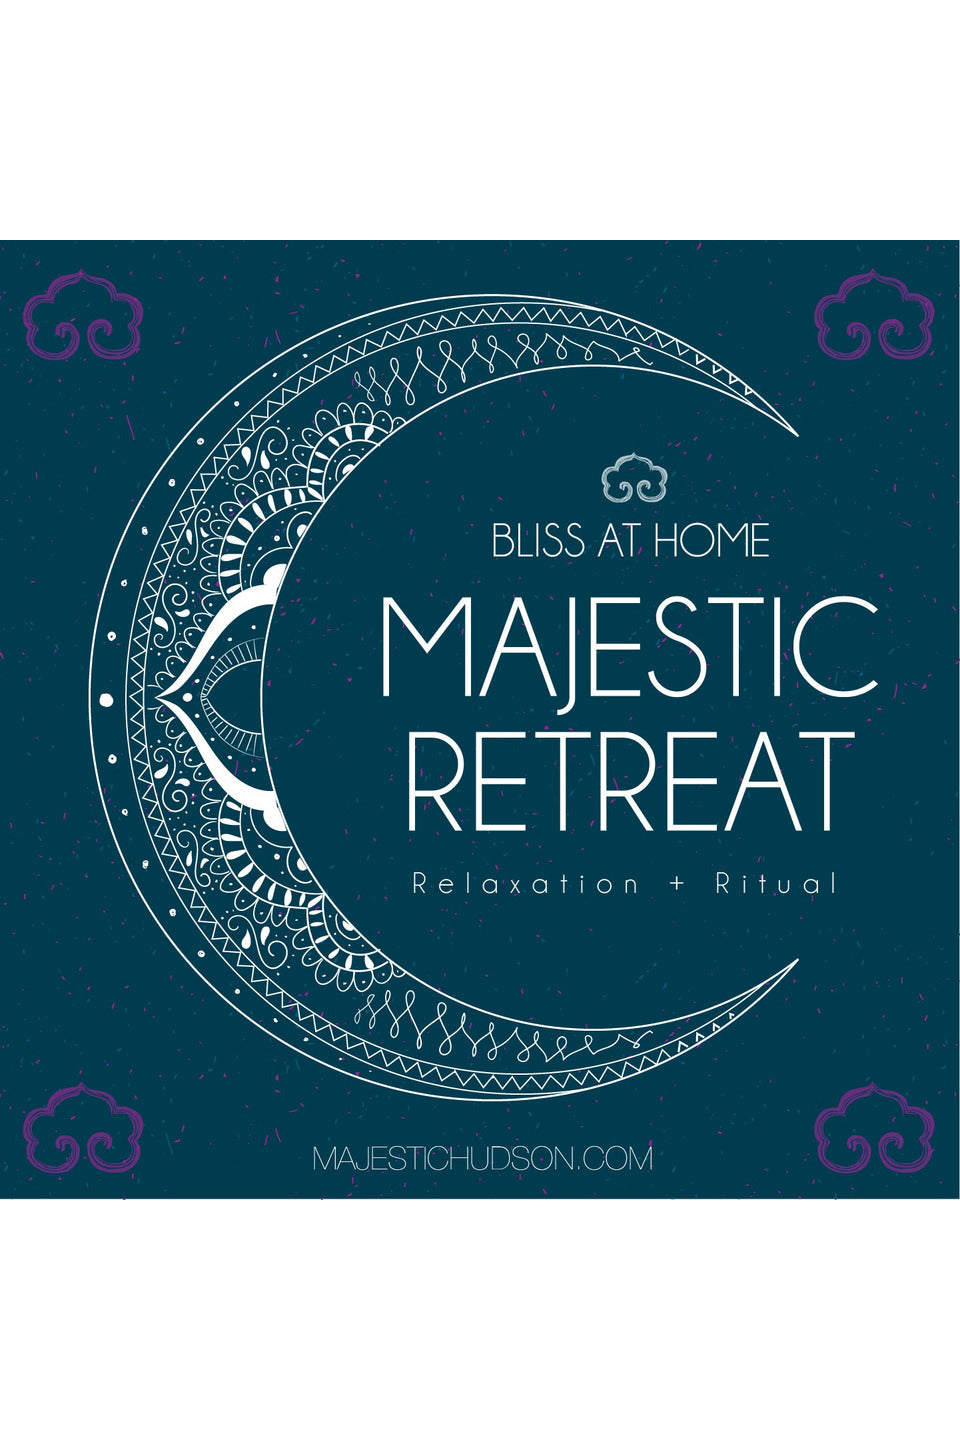 Majestic Personal Retreat | BLISS at HOME Majestic Hudson Lifestyle Experiences